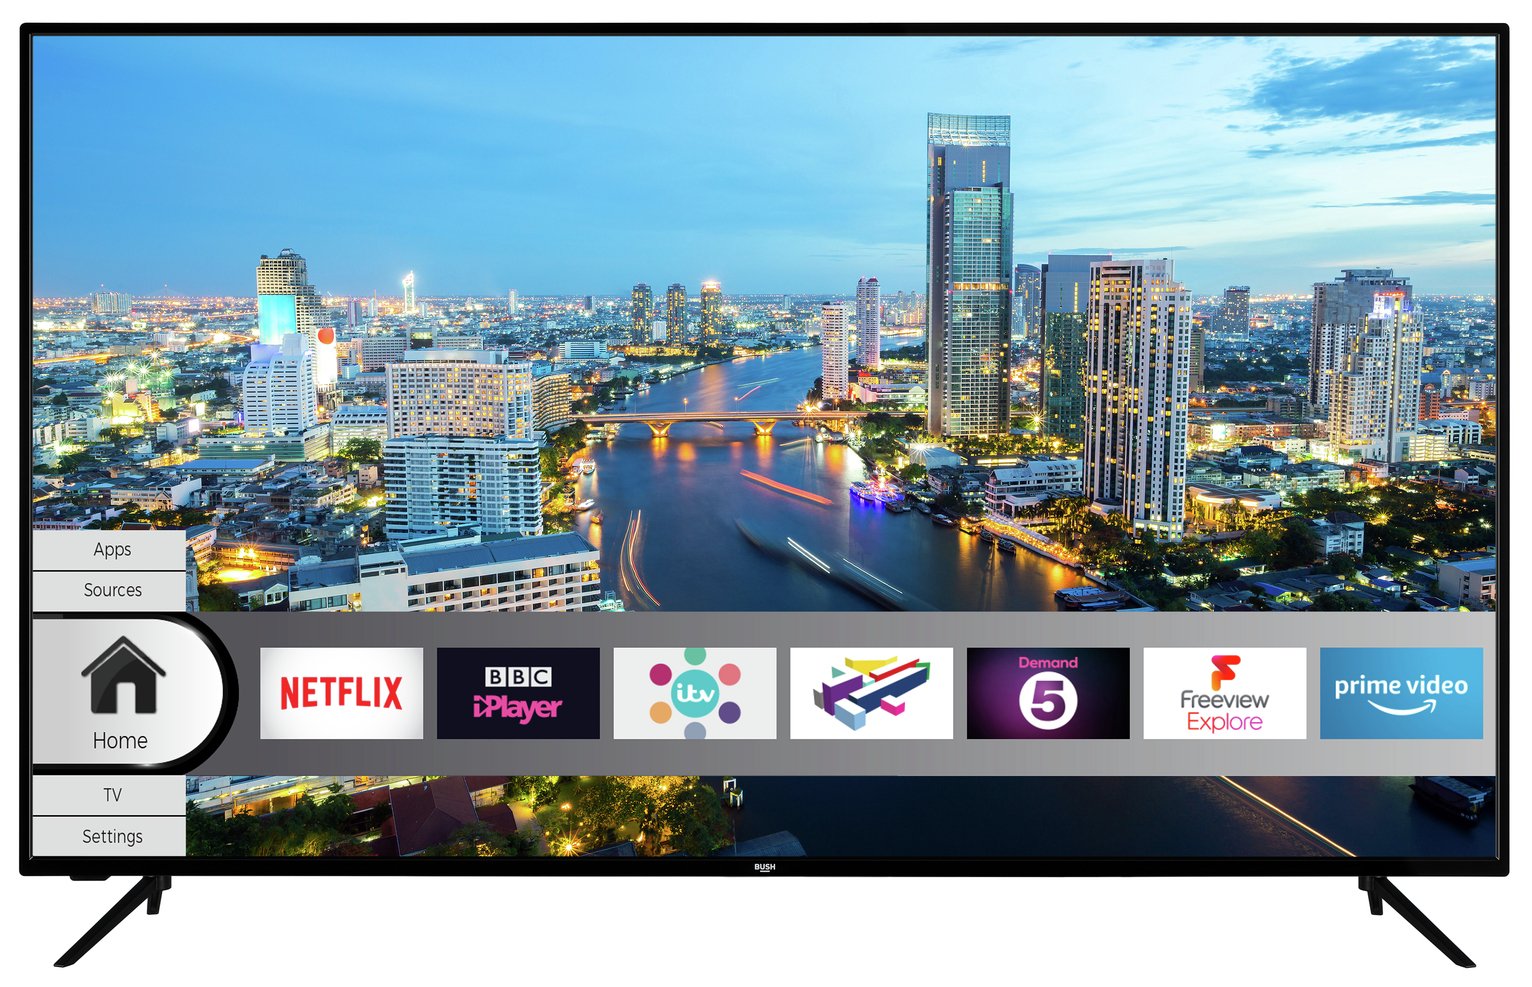 Bush 65 Inch Smart 4K UHD LED TV with HDR Review